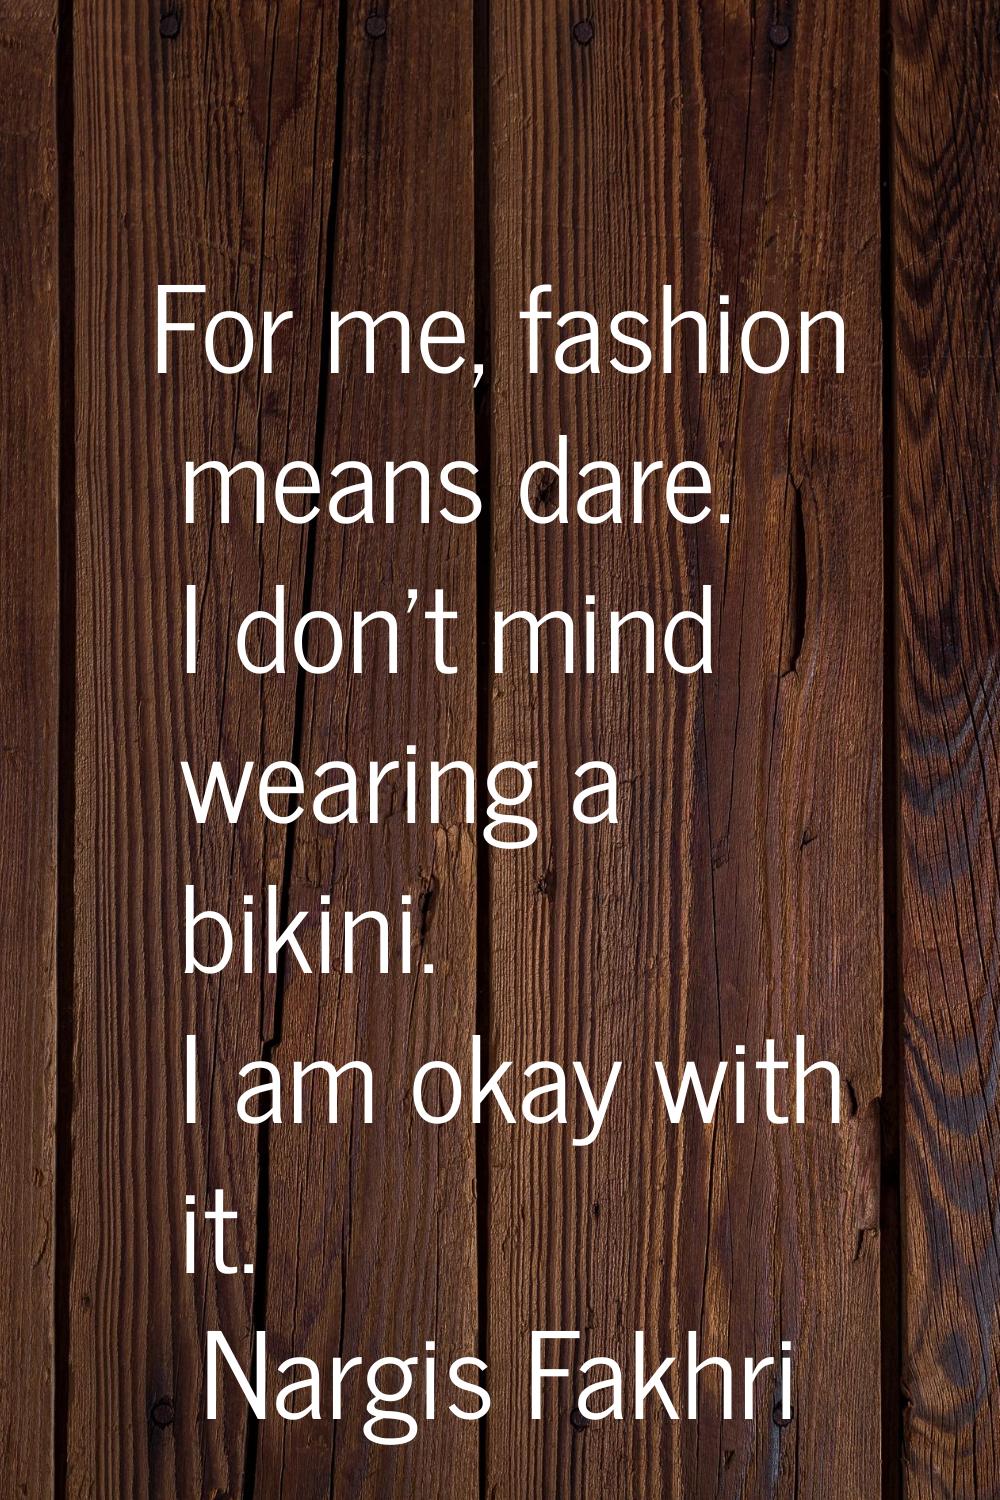 For me, fashion means dare. I don't mind wearing a bikini. I am okay with it.